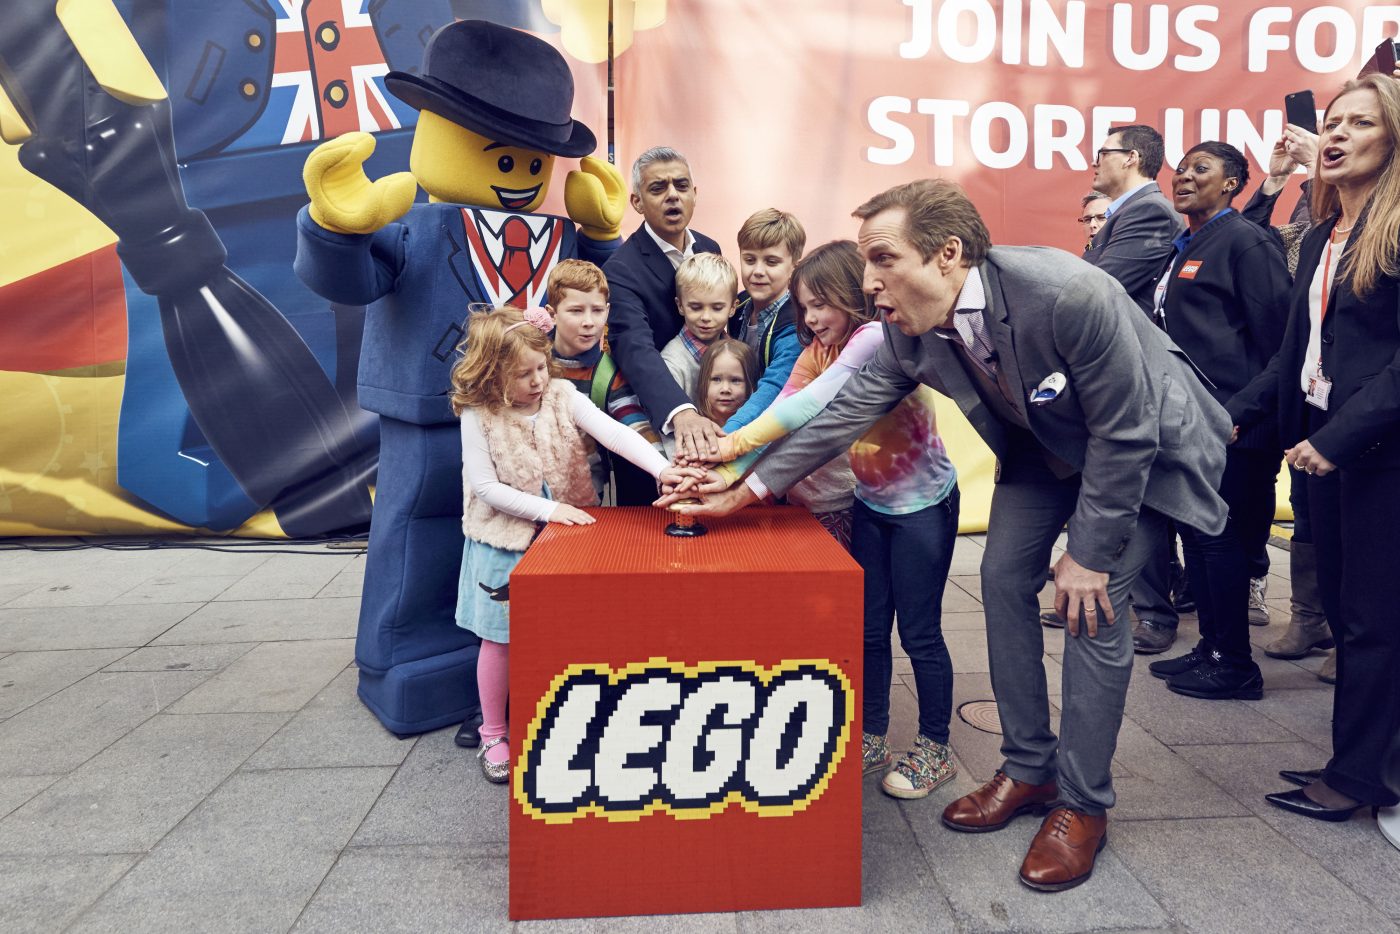 Thursday 17th November 2016, Leicester Square, London: The Mayor of London Sadiq Khan opens the largest Lego Store in the world in London today. PR Handout For further information © Mikael Buck / Lego